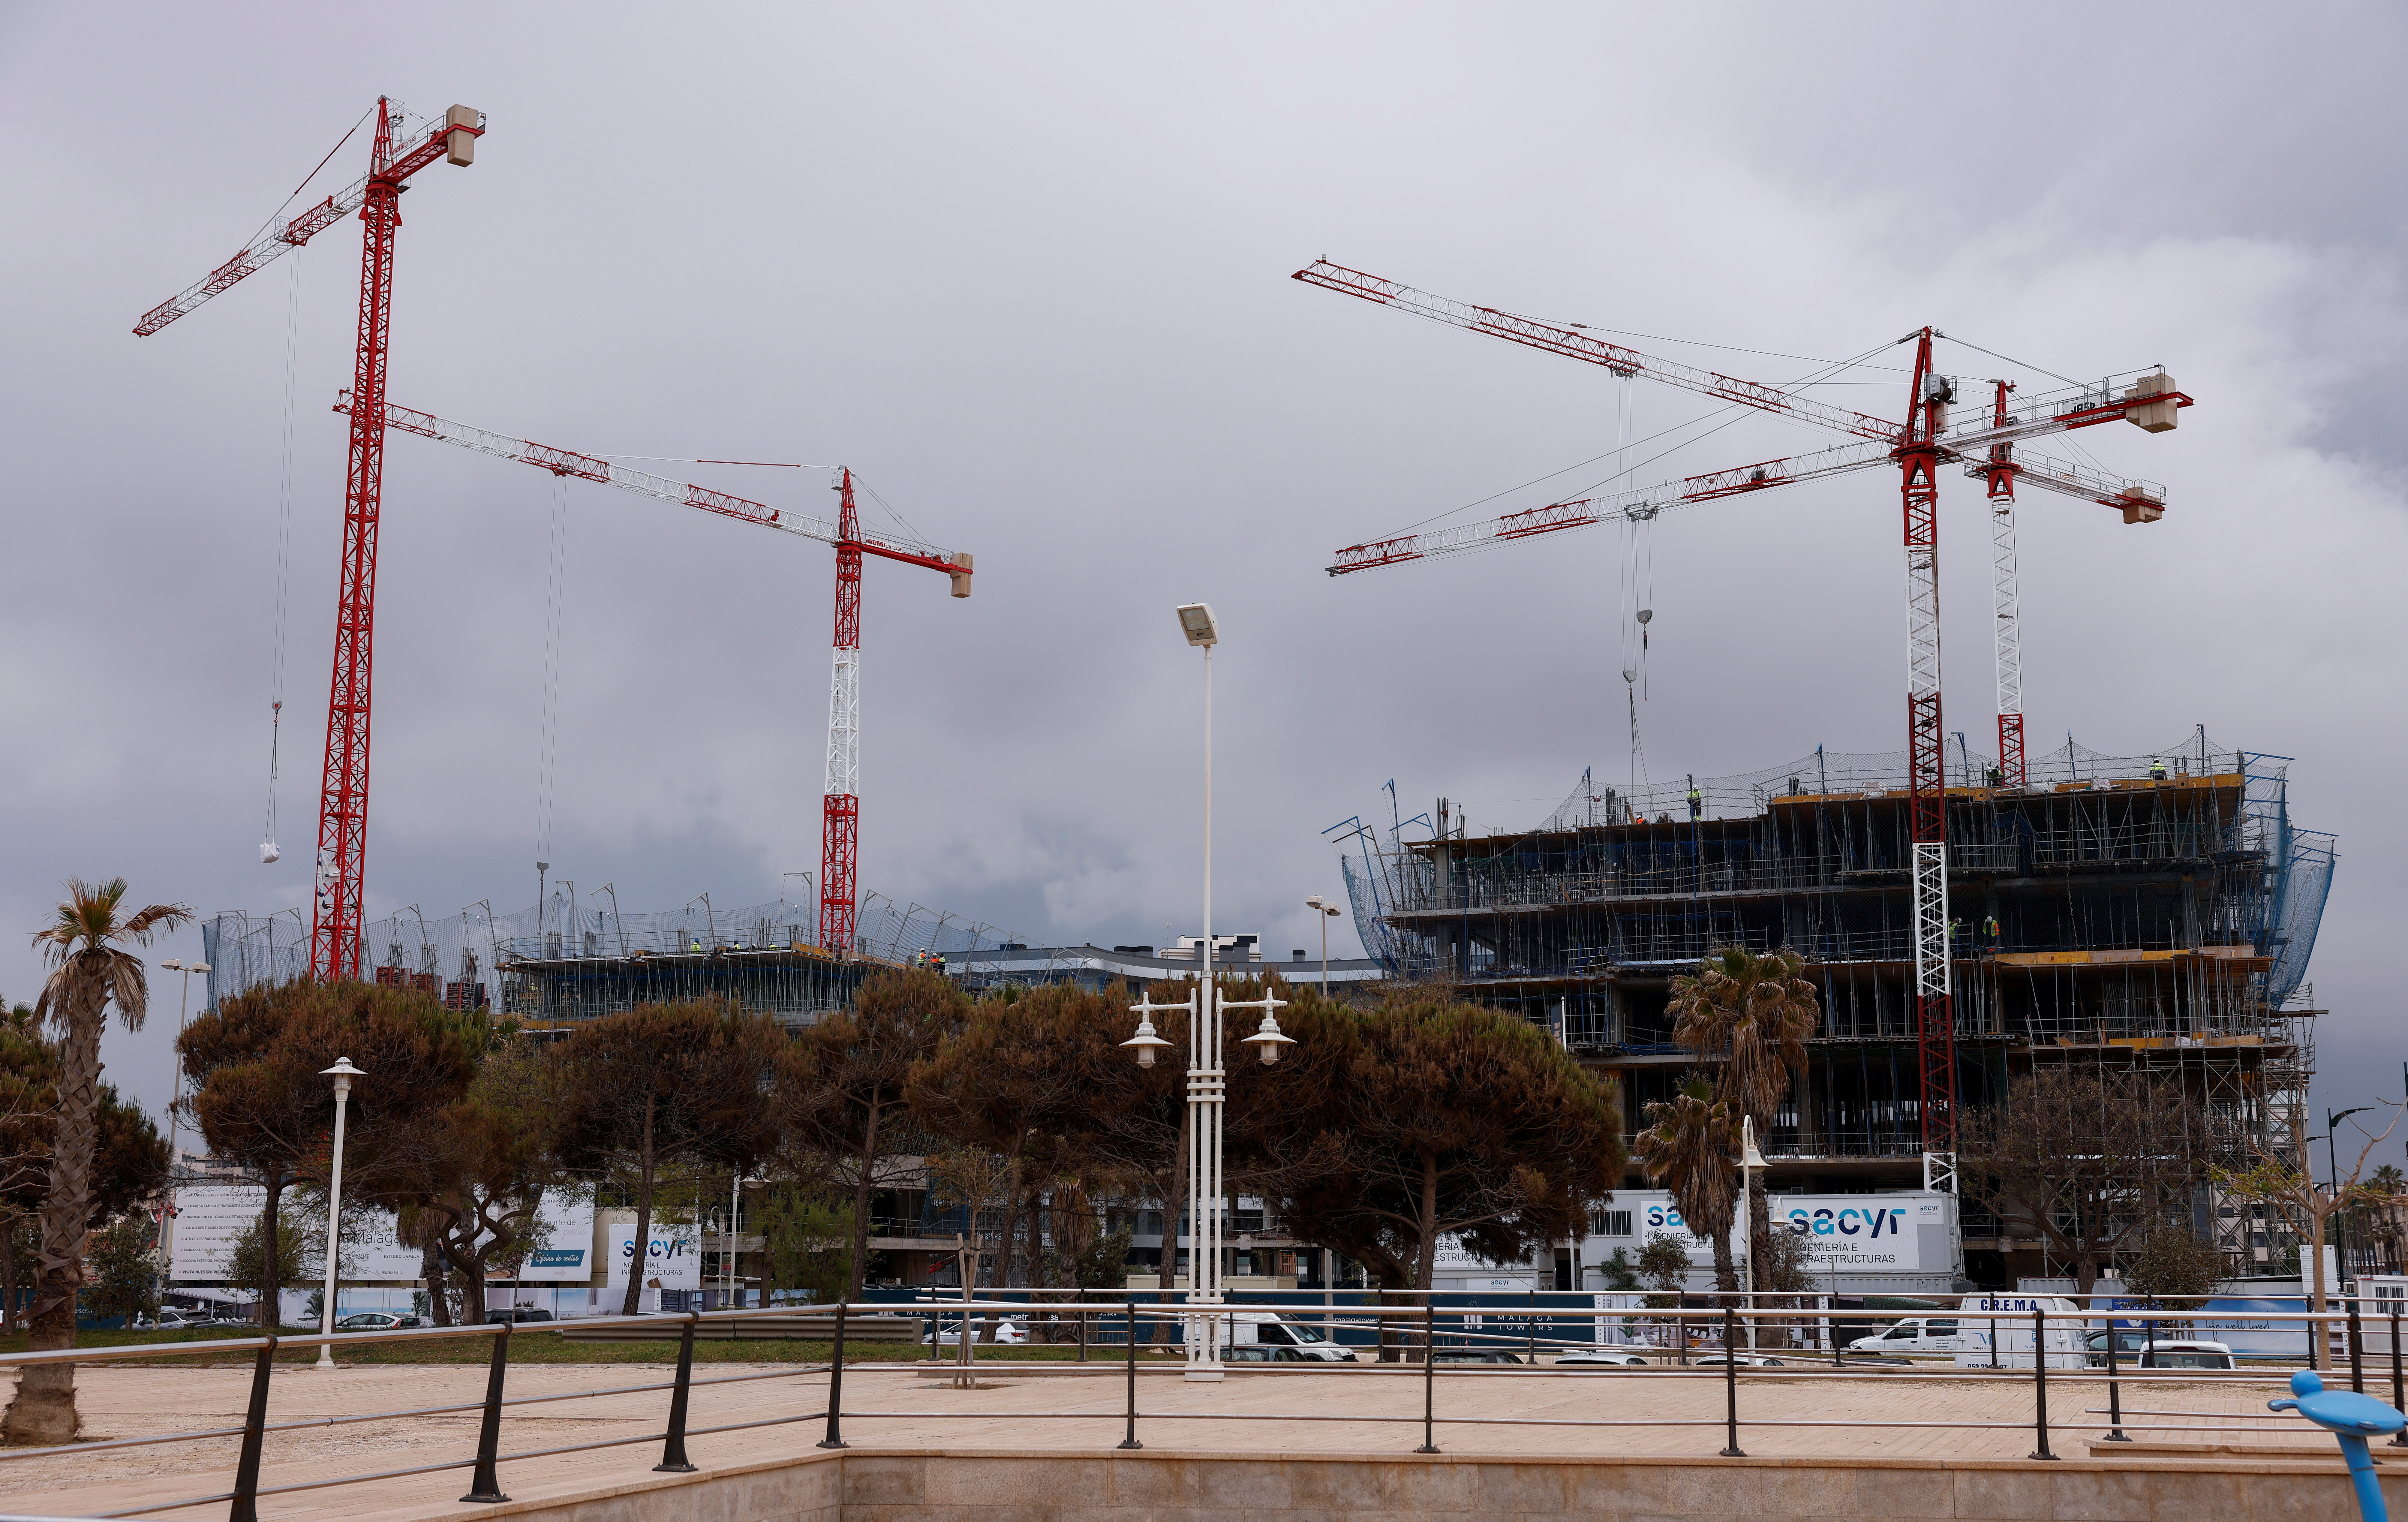 Cranes are seen at the site of an under-construction building in Malaga